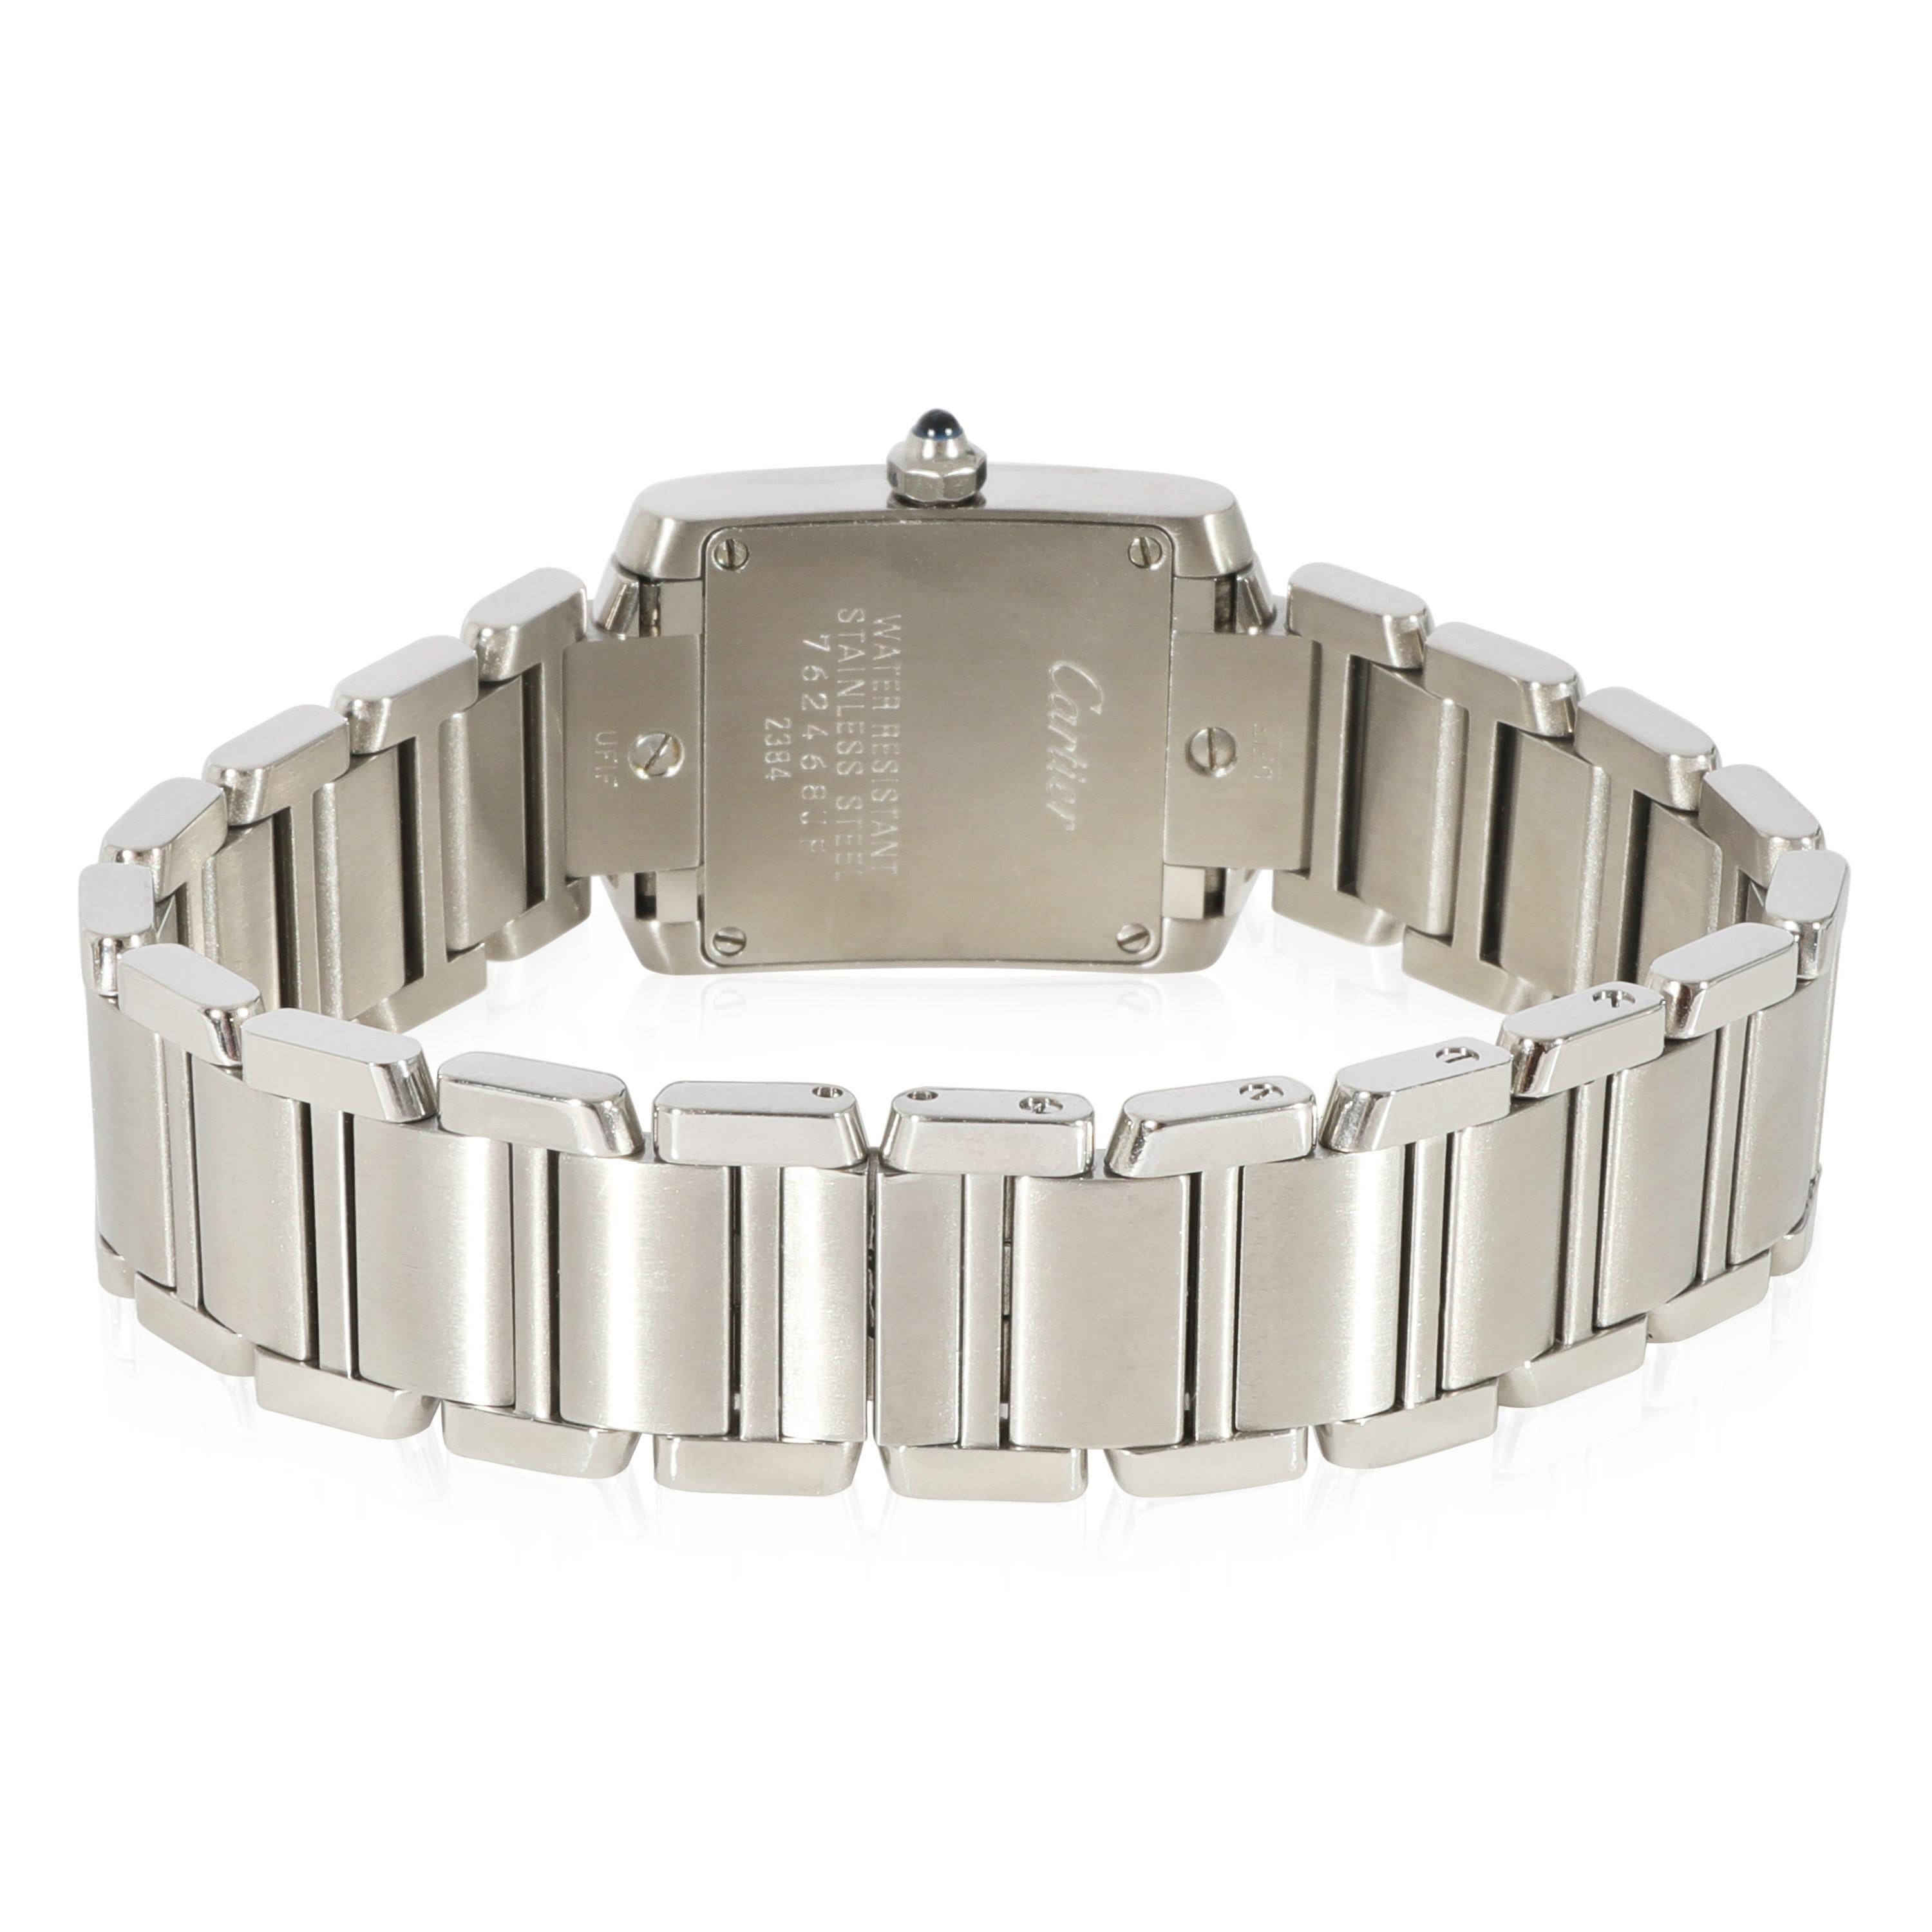 Cartier Tank Francaise W51008Q3 Women's Watch in Stainless Steel
 
 SKU: 128168
 
 PRIMARY DETAILS
 Brand: Cartier
 Model: Tank Francaise
 Country of Origin: Switzerland
 Movement Type: Quartz: Battery
 Year of Manufacture: 2010-2019
 Condition: